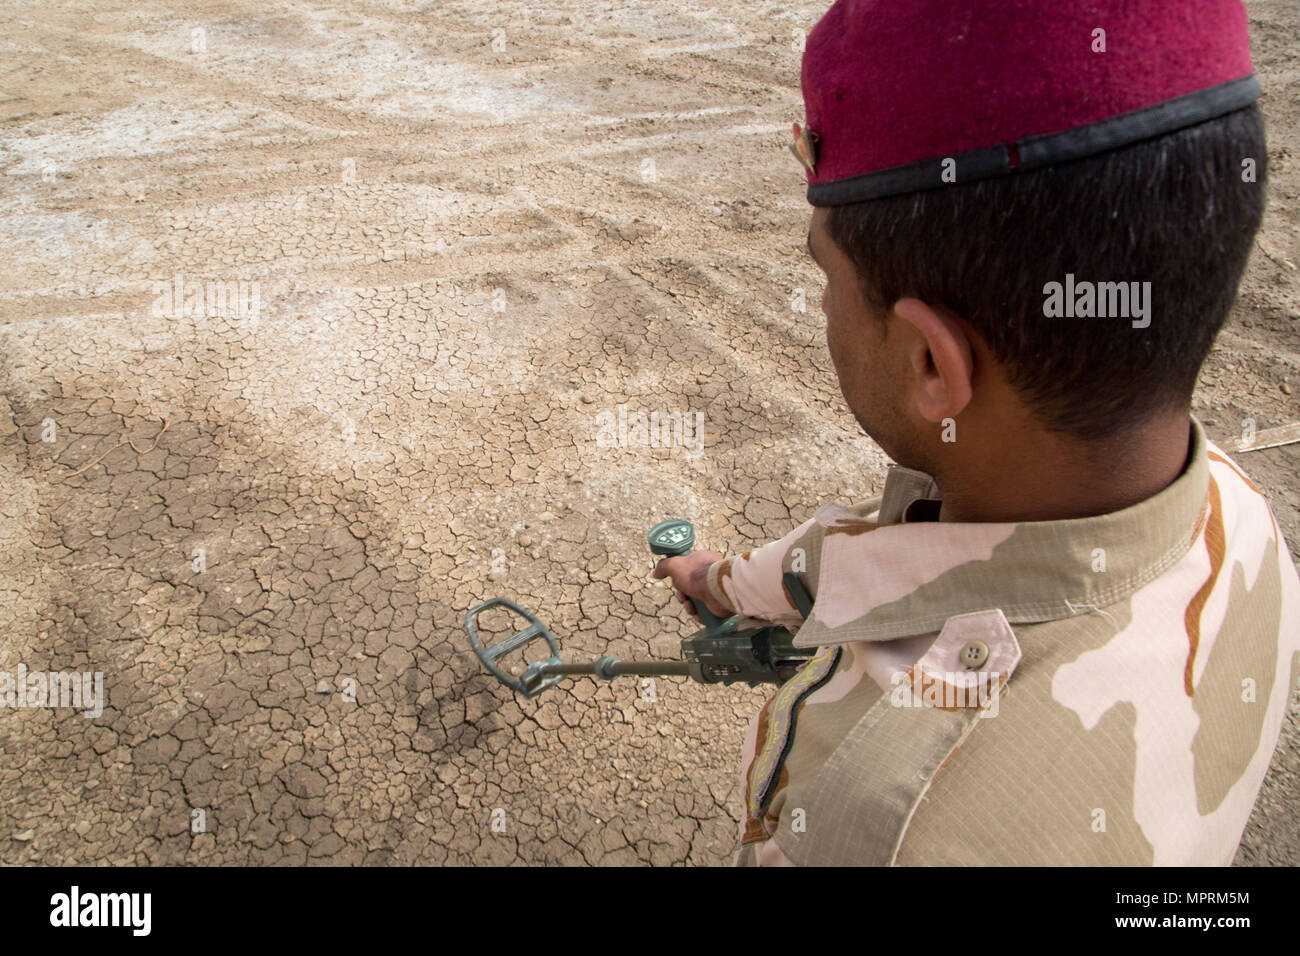 An Iraqi security forces soldier searches for simulated improvised explosive devices using a mine detector during counter-IED training led by British army trainers deployed in support of Combined Joint Task Force – Operation Inherent Resolve at Camp Taji, Iraq, April 12, 2017. This training is part of the overall Combined Joint Task Force – Operation Inherent Resolve building partner capacity mission by training and improving the capability of partnered forces fighting ISIS. CJTF-OIR is the global Coalition to defeat ISIS in Iraq and Syria.  (U.S. Army photo by Spc. Christopher Brecht) Stock Photo